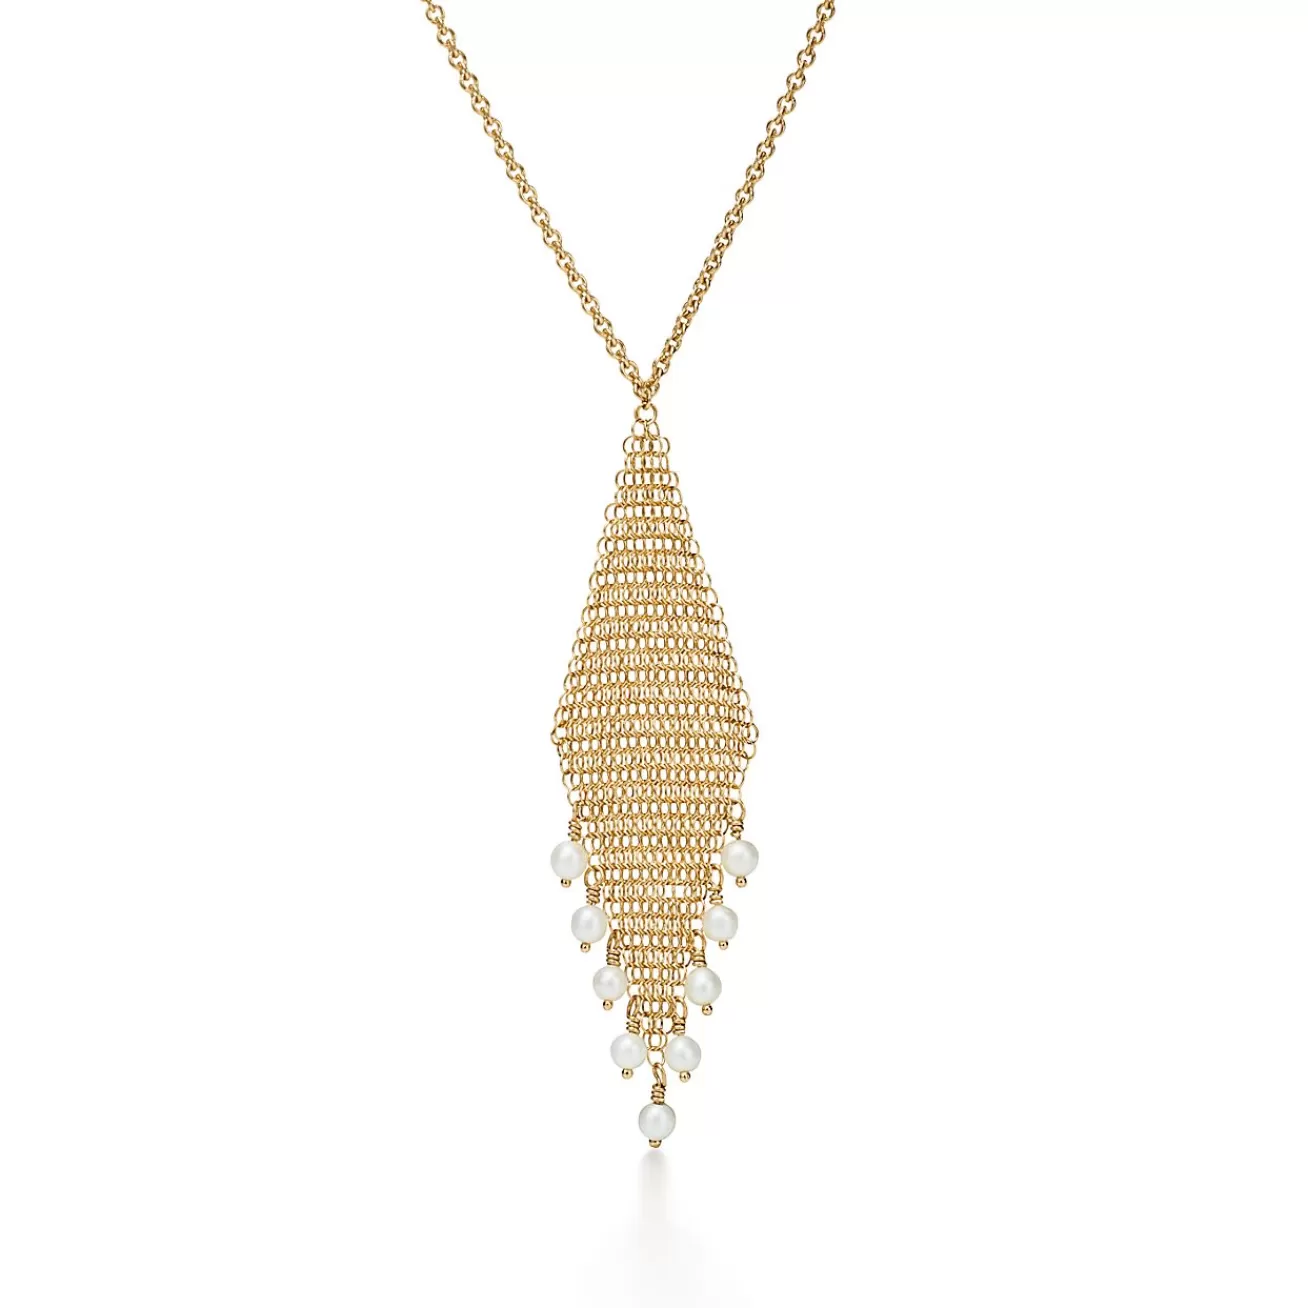 Tiffany & Co. Elsa Peretti® Mesh fringe pendant in 18k gold with freshwater pearls. | ^ Necklaces & Pendants | Gold Jewelry